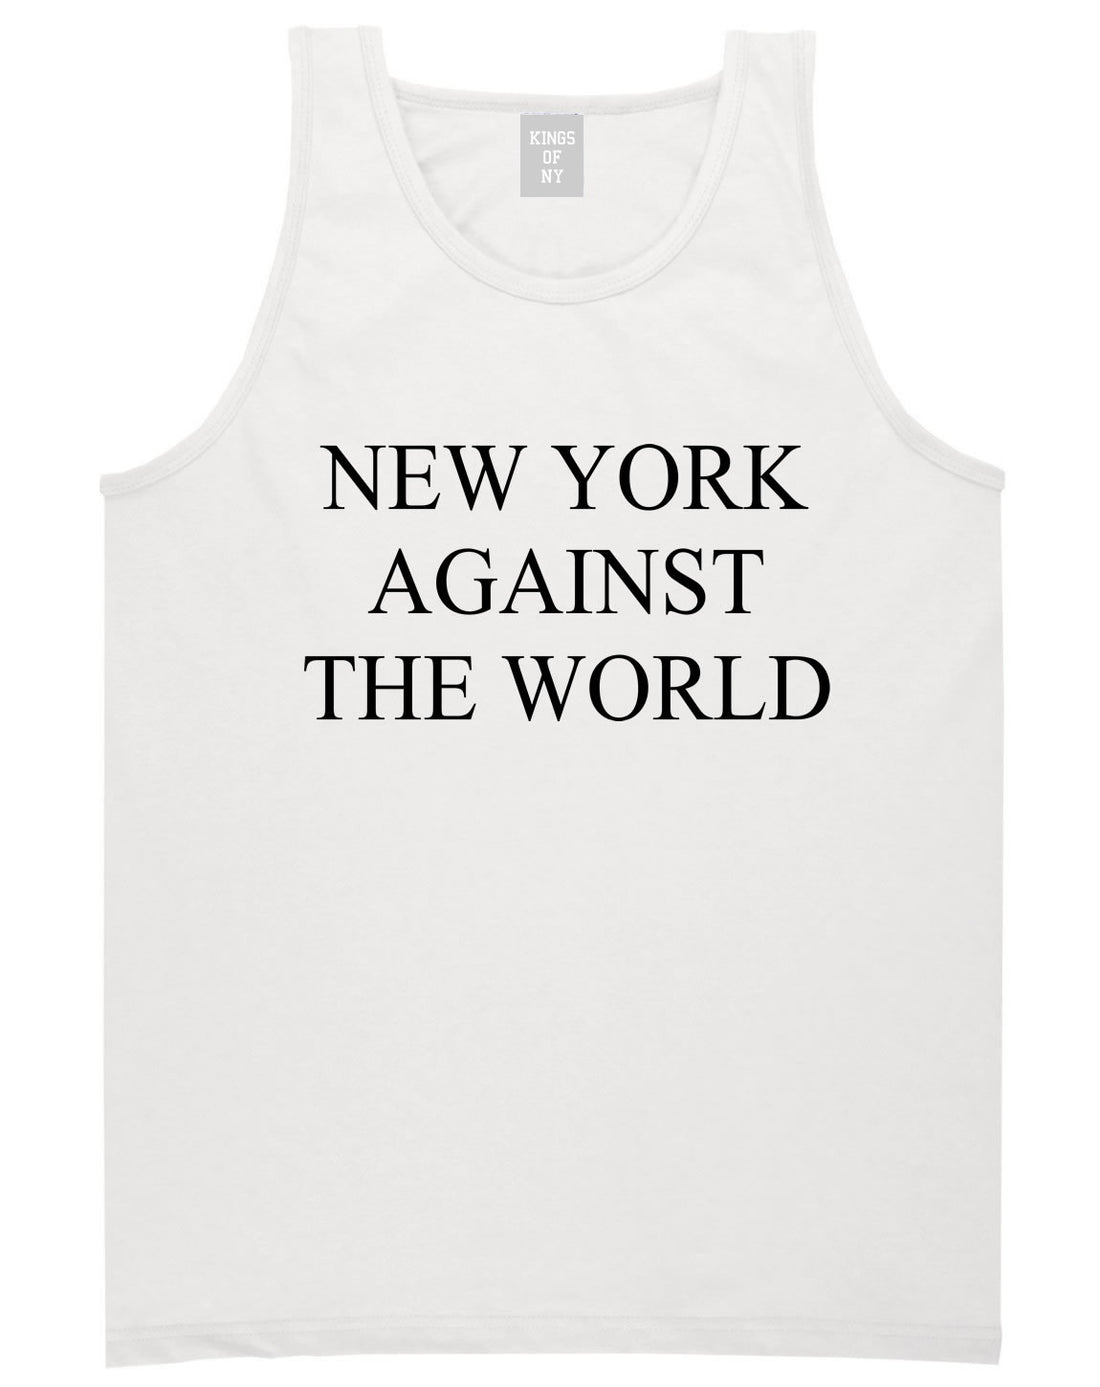 New York Against The World Tank Top in White by Kings Of NY